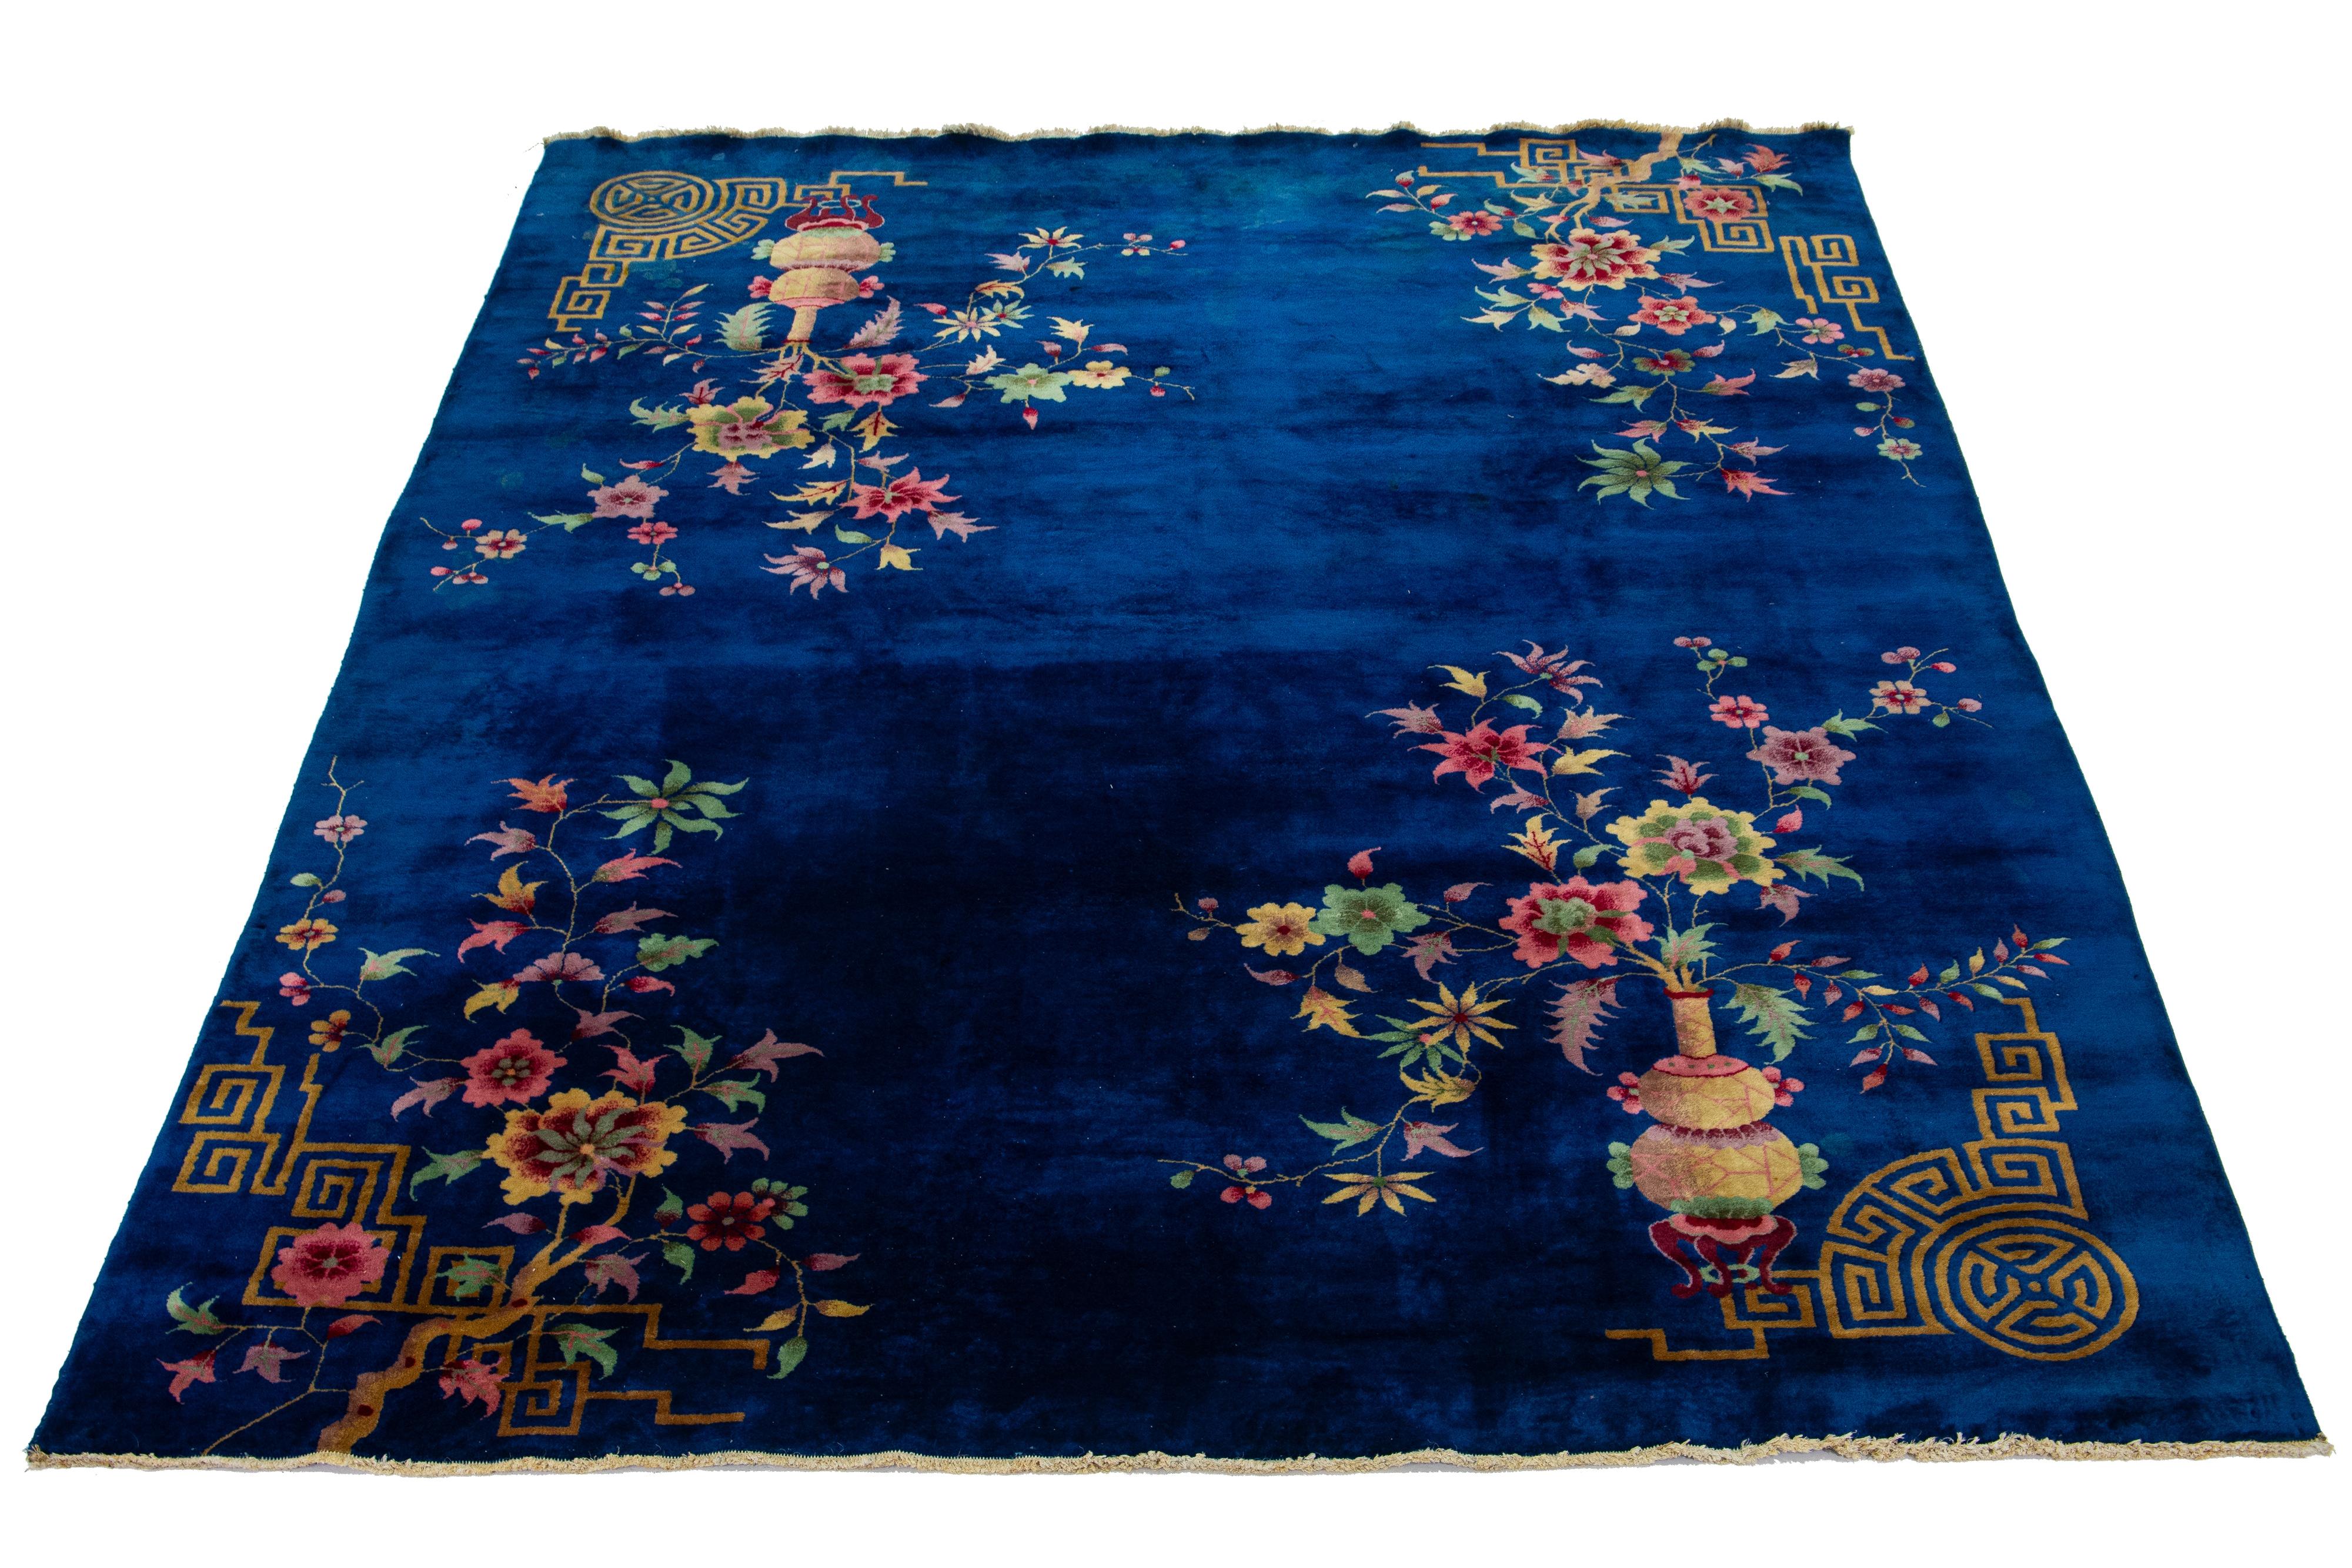 A stunning antique Chinese Art Deco wool rug with a blue backdrop and various multicolored accents featuring a charming all-over floral design. This exceptional rug dates back to circa 1920.

This rug measures 8' 5